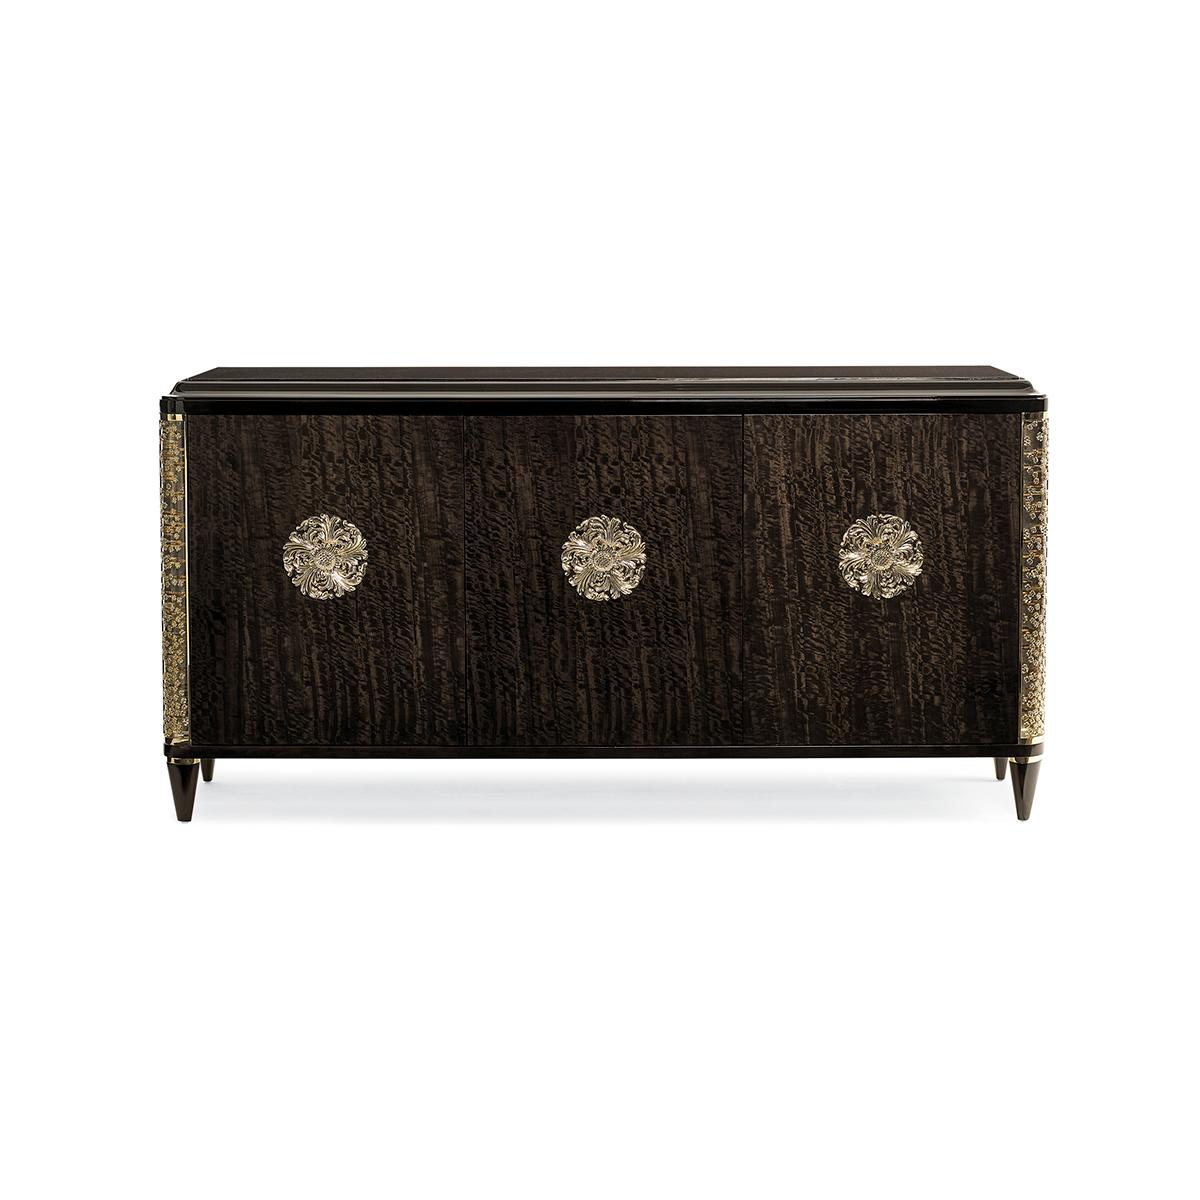 Mid Century Grandiose credenza, Bold and daring, your eye is immediately drawn to the beautifully dyed eucalyptus veneers and the three custom-designed floral-inspired door pulls.

The entire case, inside and out, is veneered in Nightfall—truly